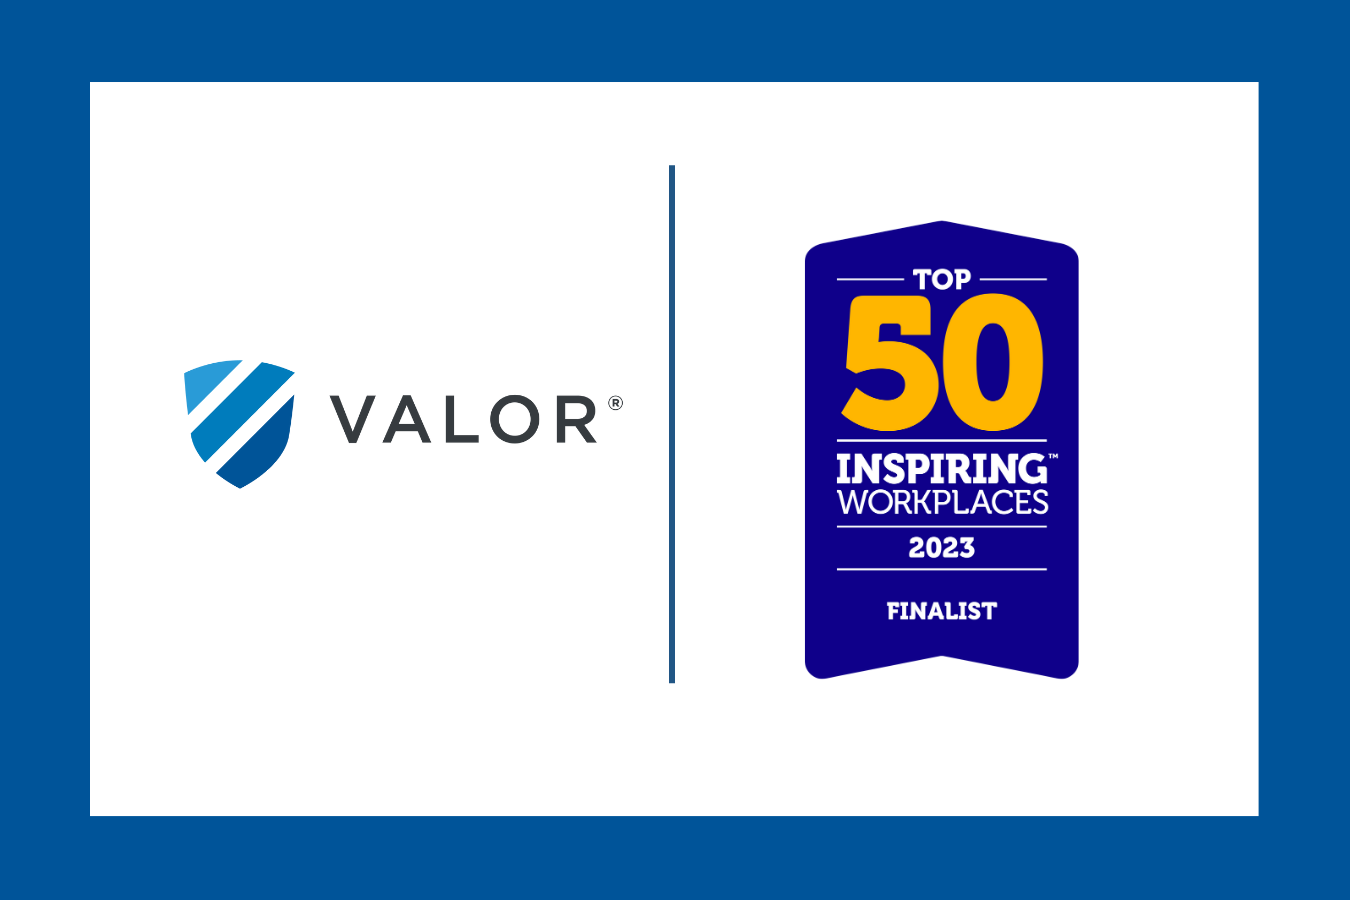 Valor a Finalist for Top 50 Inspiring Workplaces™